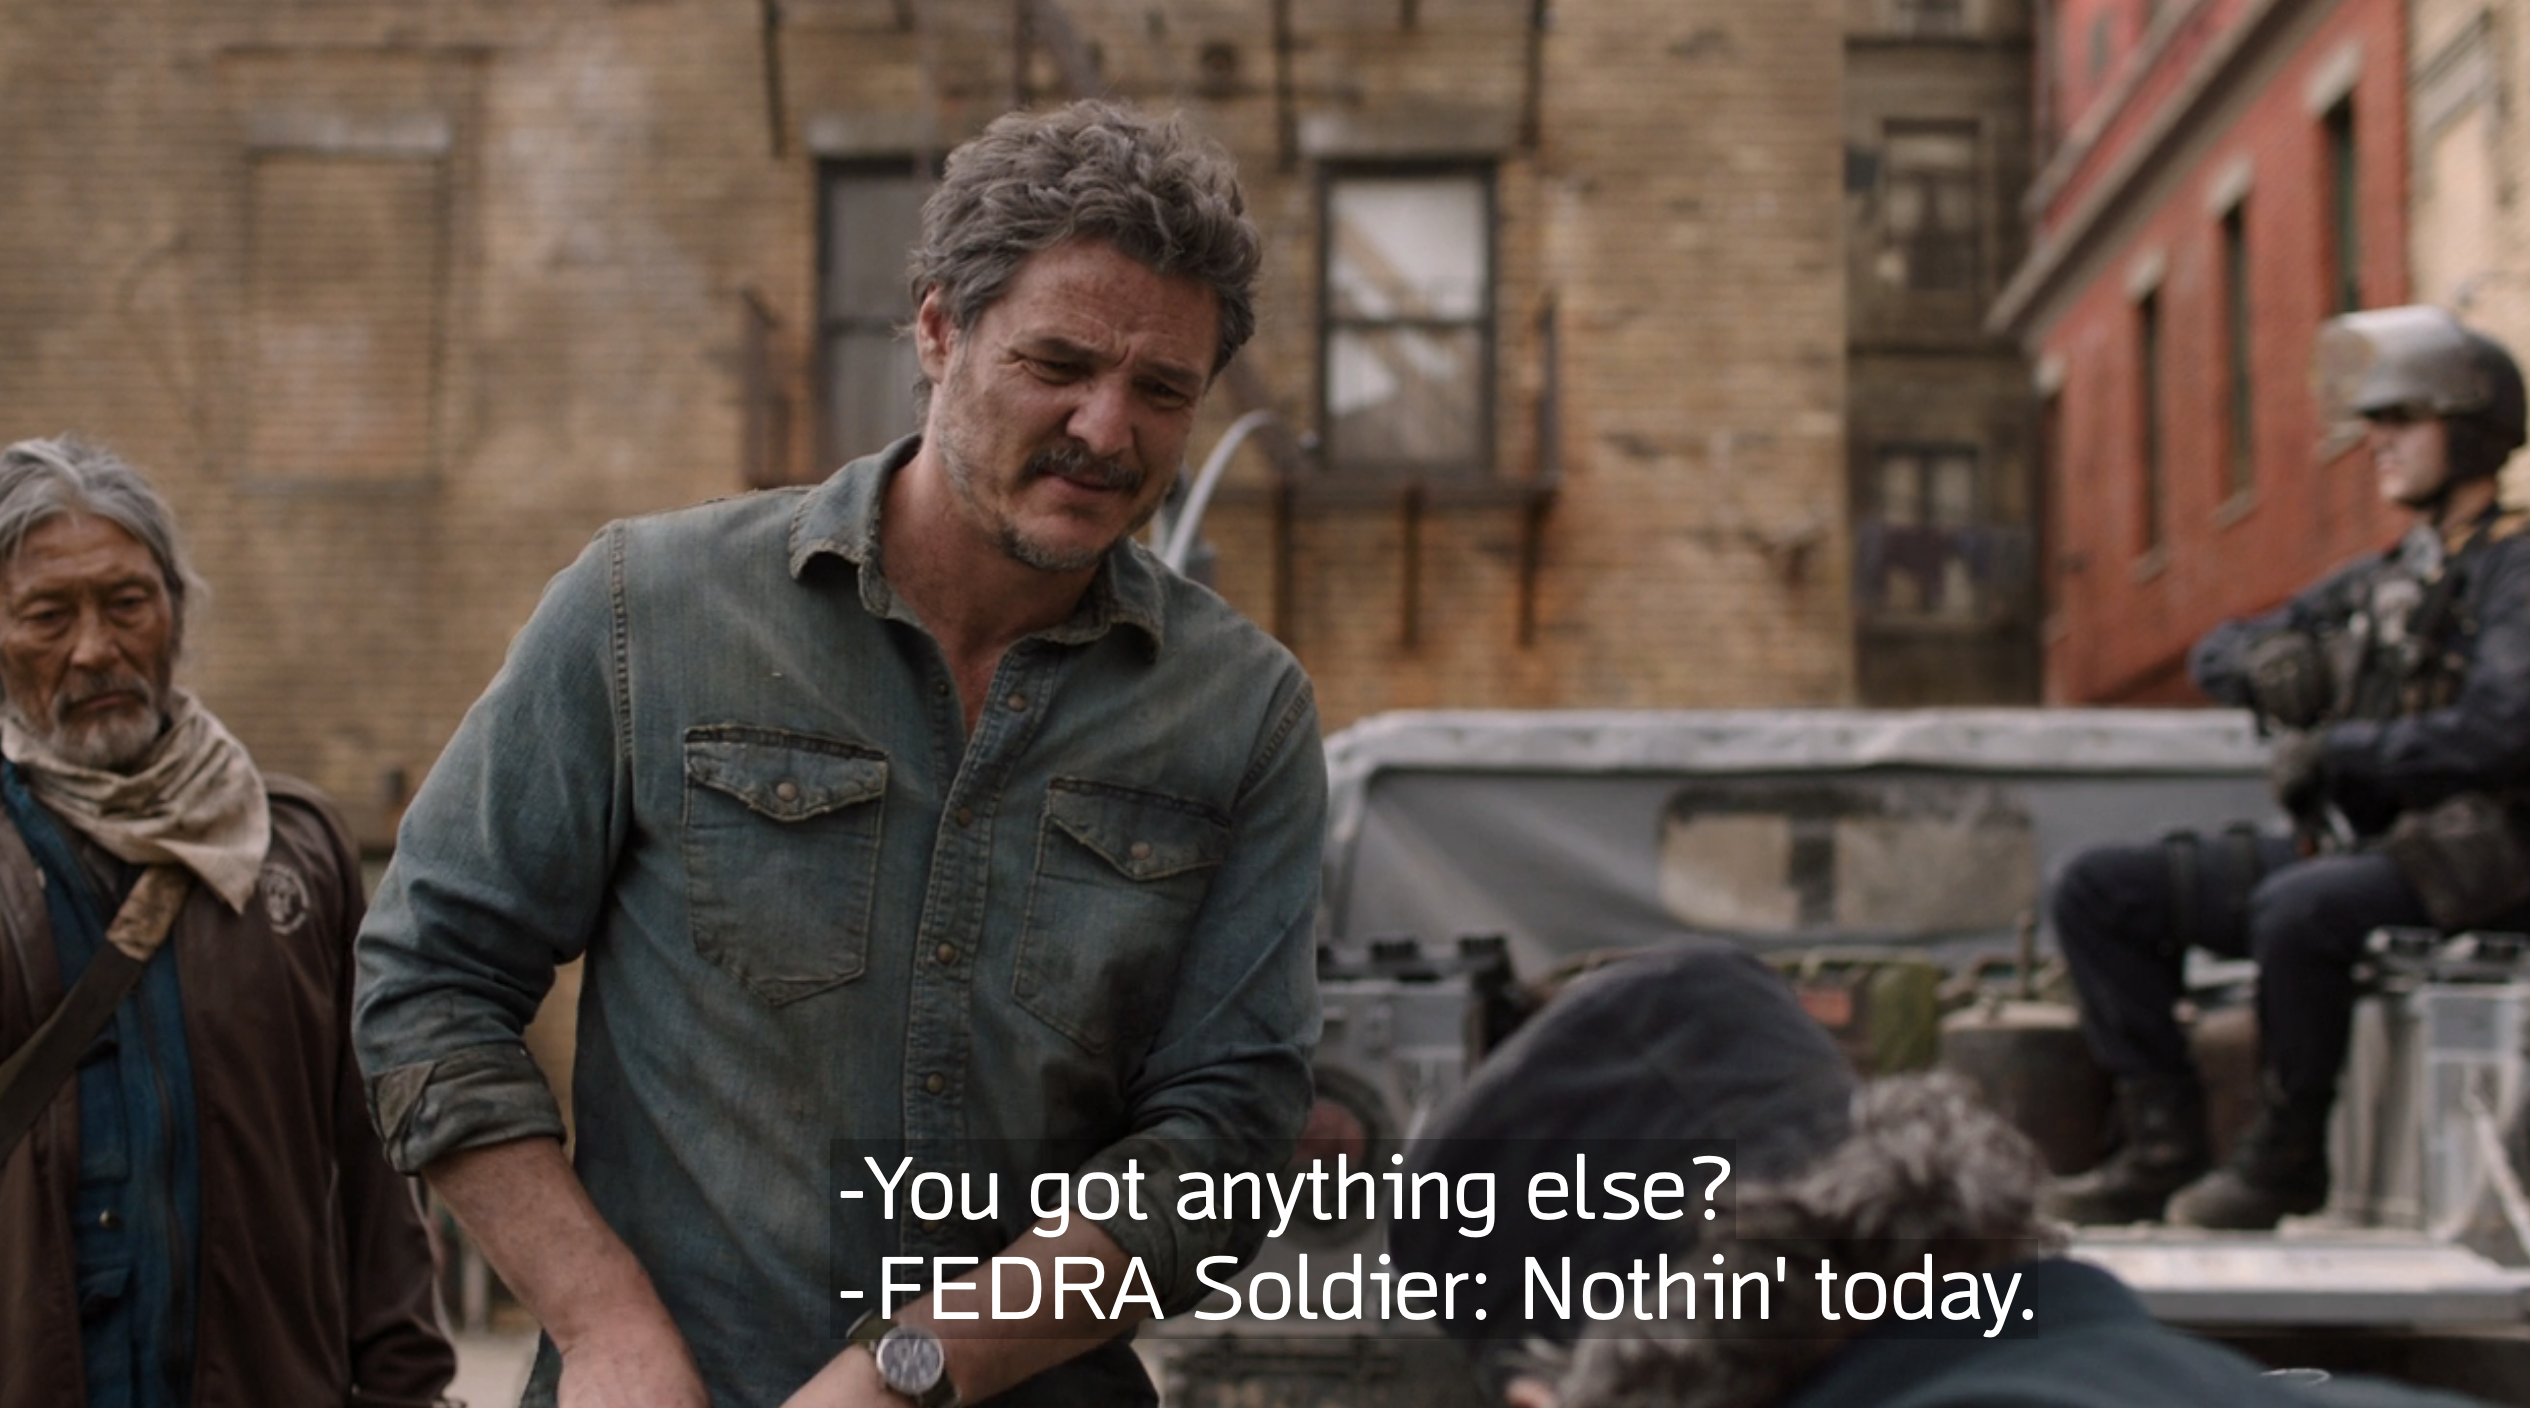 Joel asking &quot;You got anything else?&quot; and FEDRA soldier saying &quot;Nothin&#x27; today&quot;